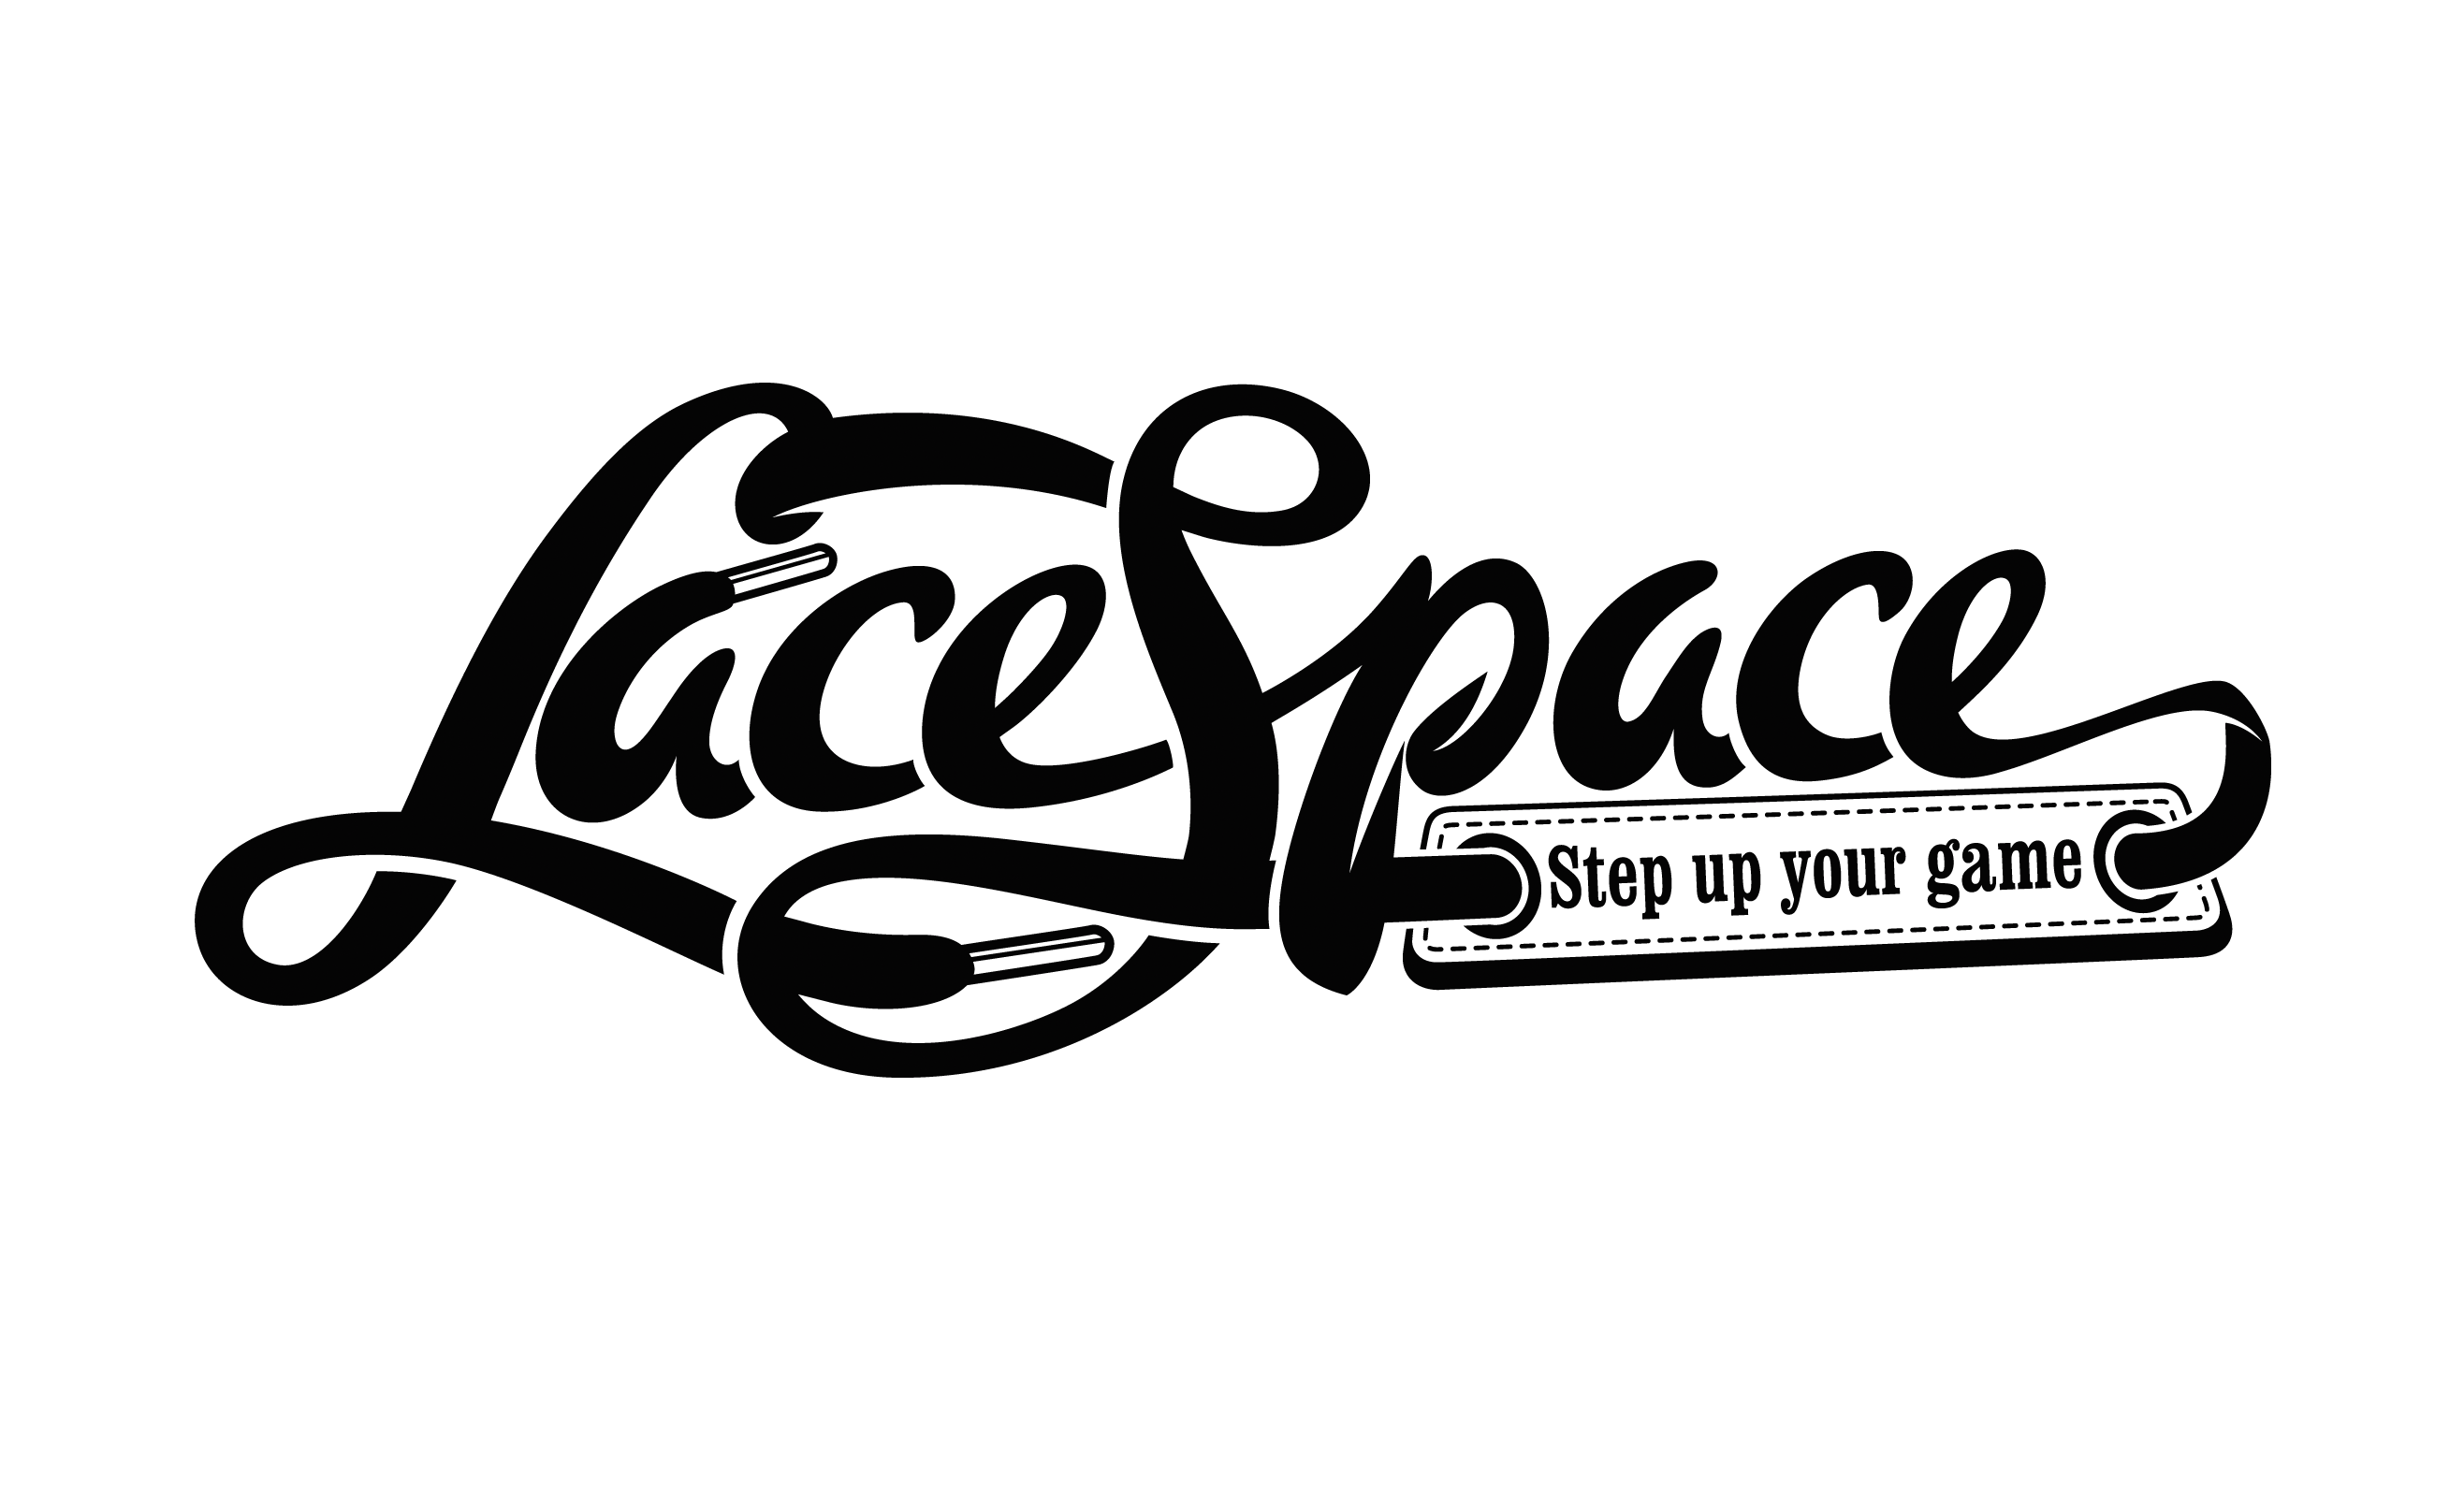 LaceSpace Success Story - Online marketing for a successful ecommerce website